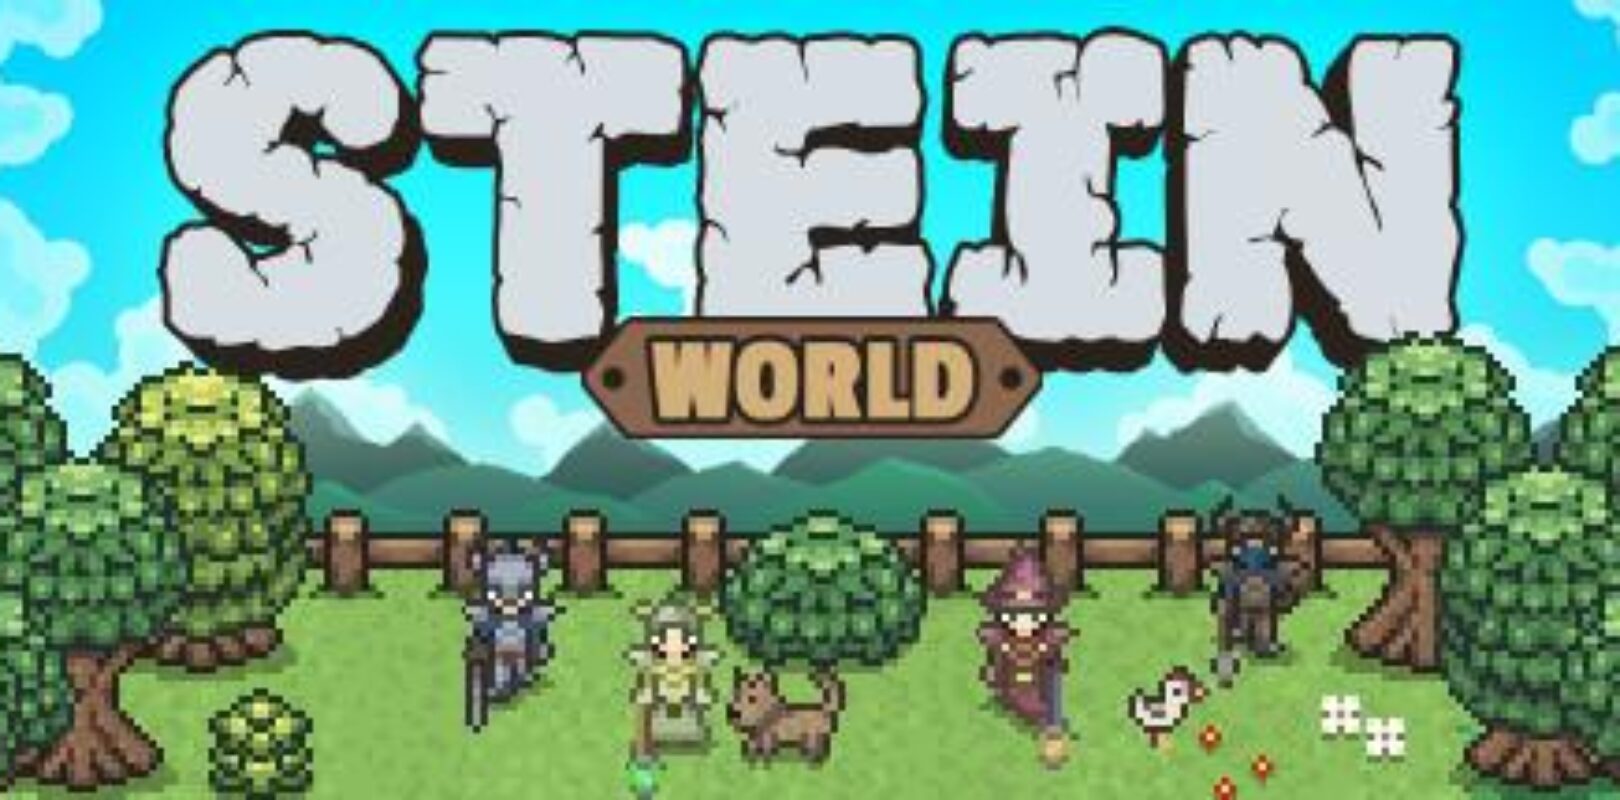 Stein World Gift Pack Key Code Giveaway Ended Pivotal Gamers - roblox keycode